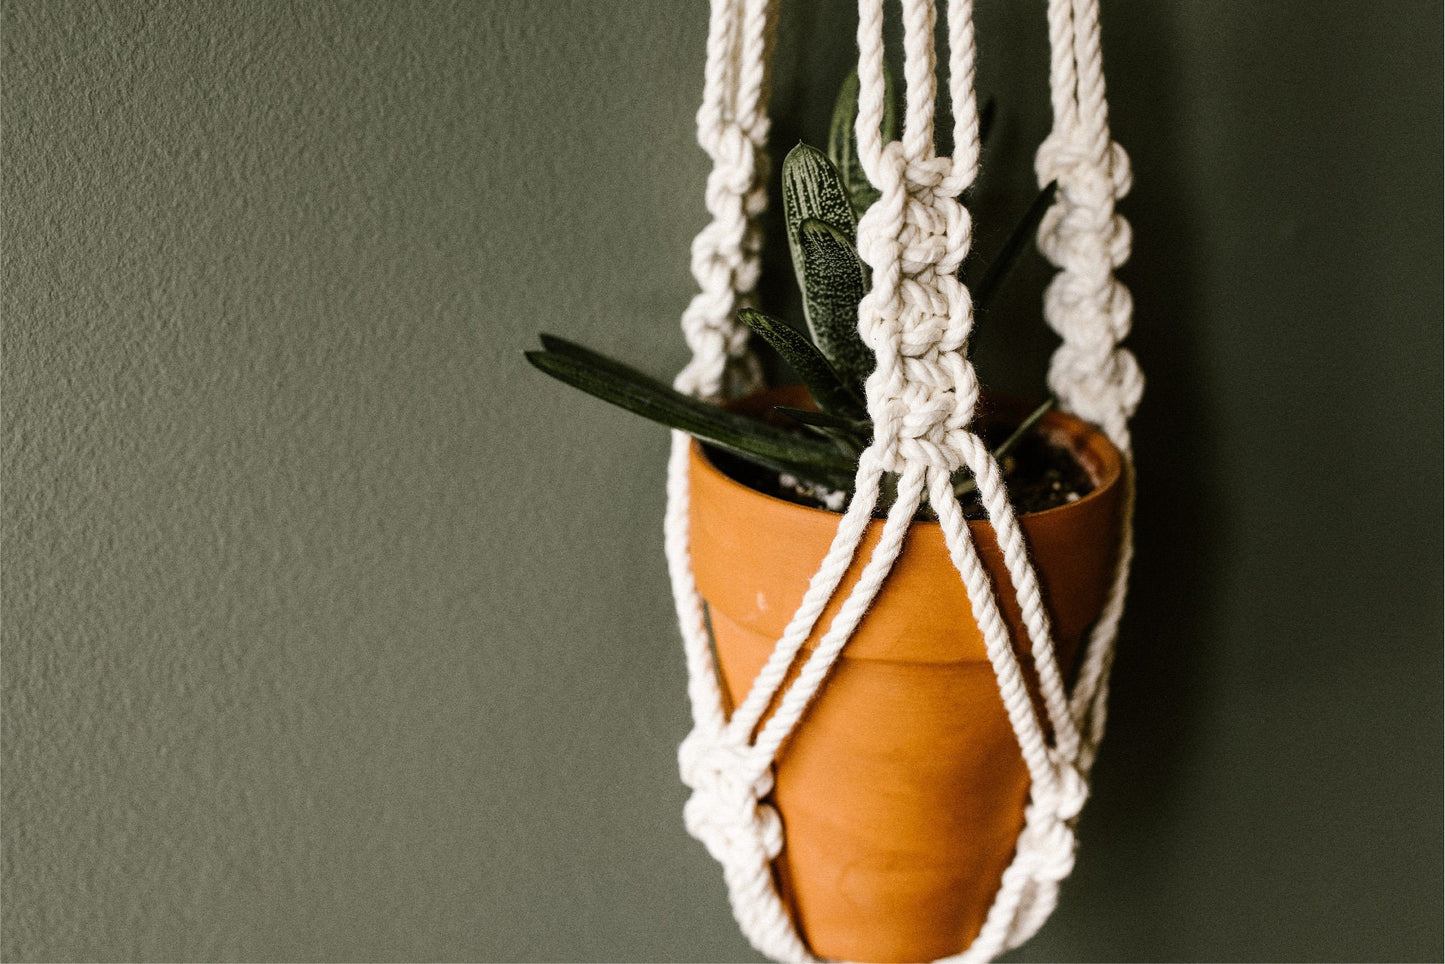 DIY macrame plant hanger kit with macrame knots guide/instructions